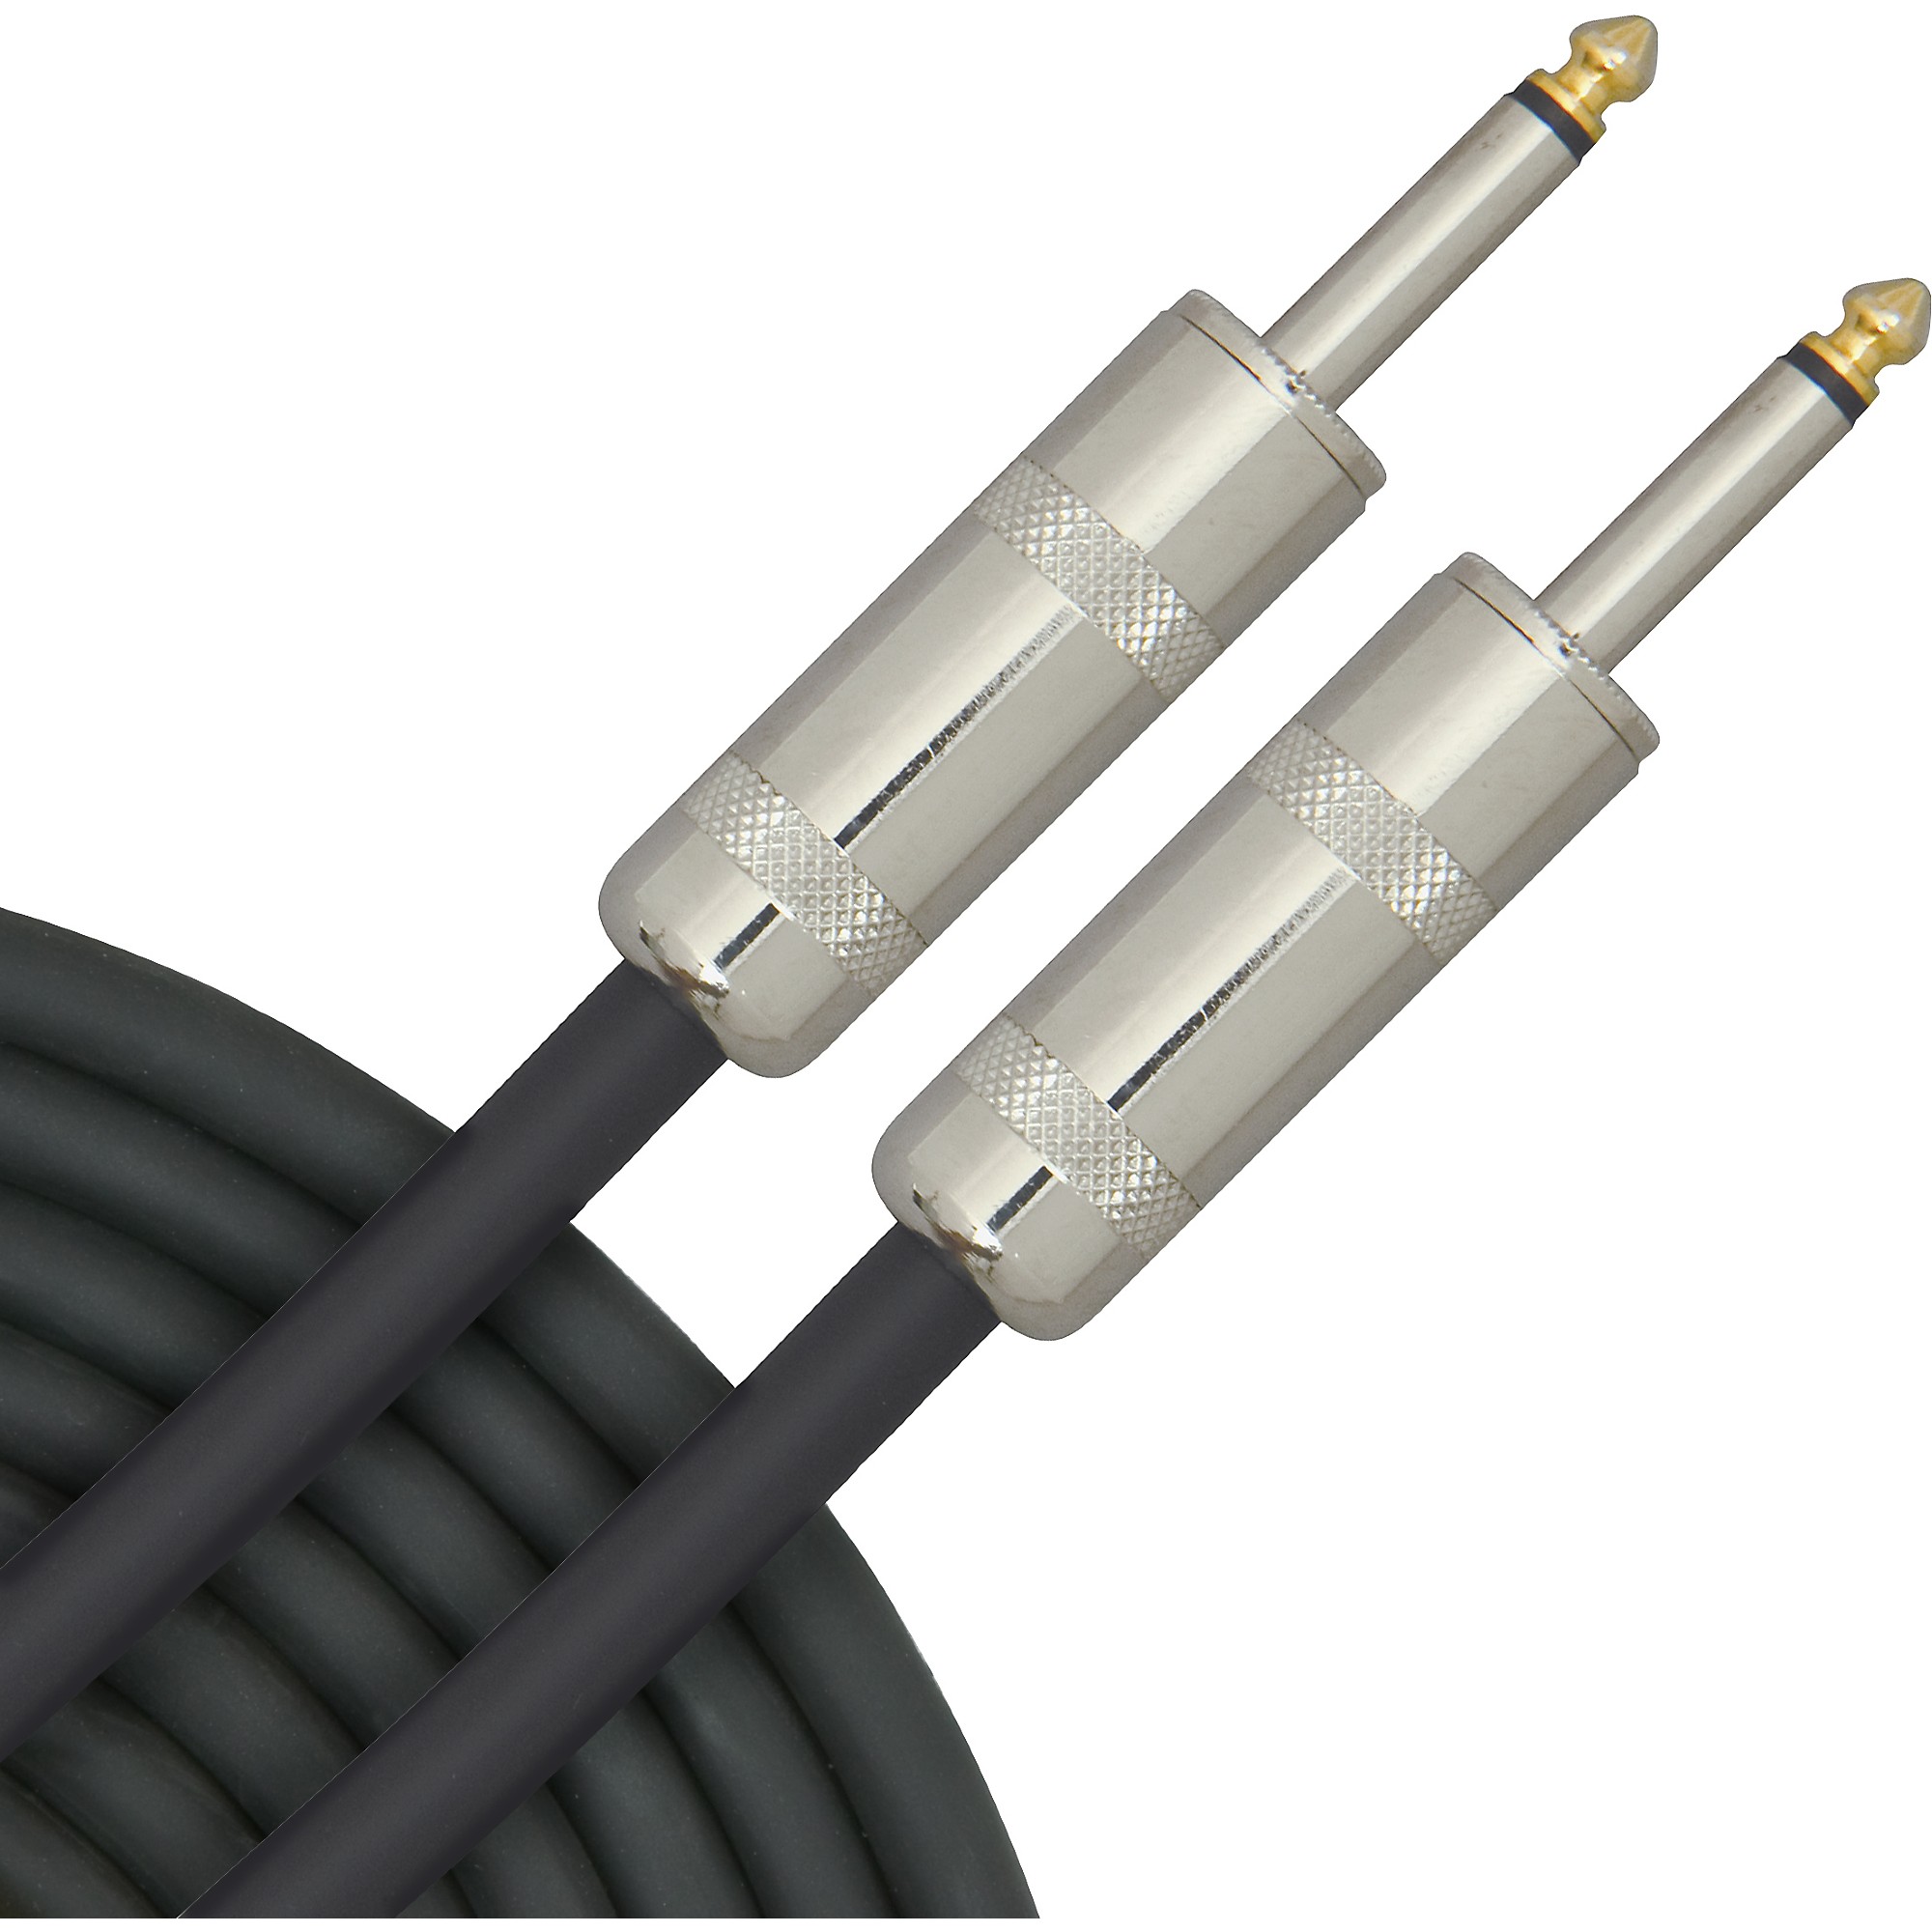 50 FT foot feet pro audio 1/4 to dual banana plug speaker cable PA 16 gauge cord 